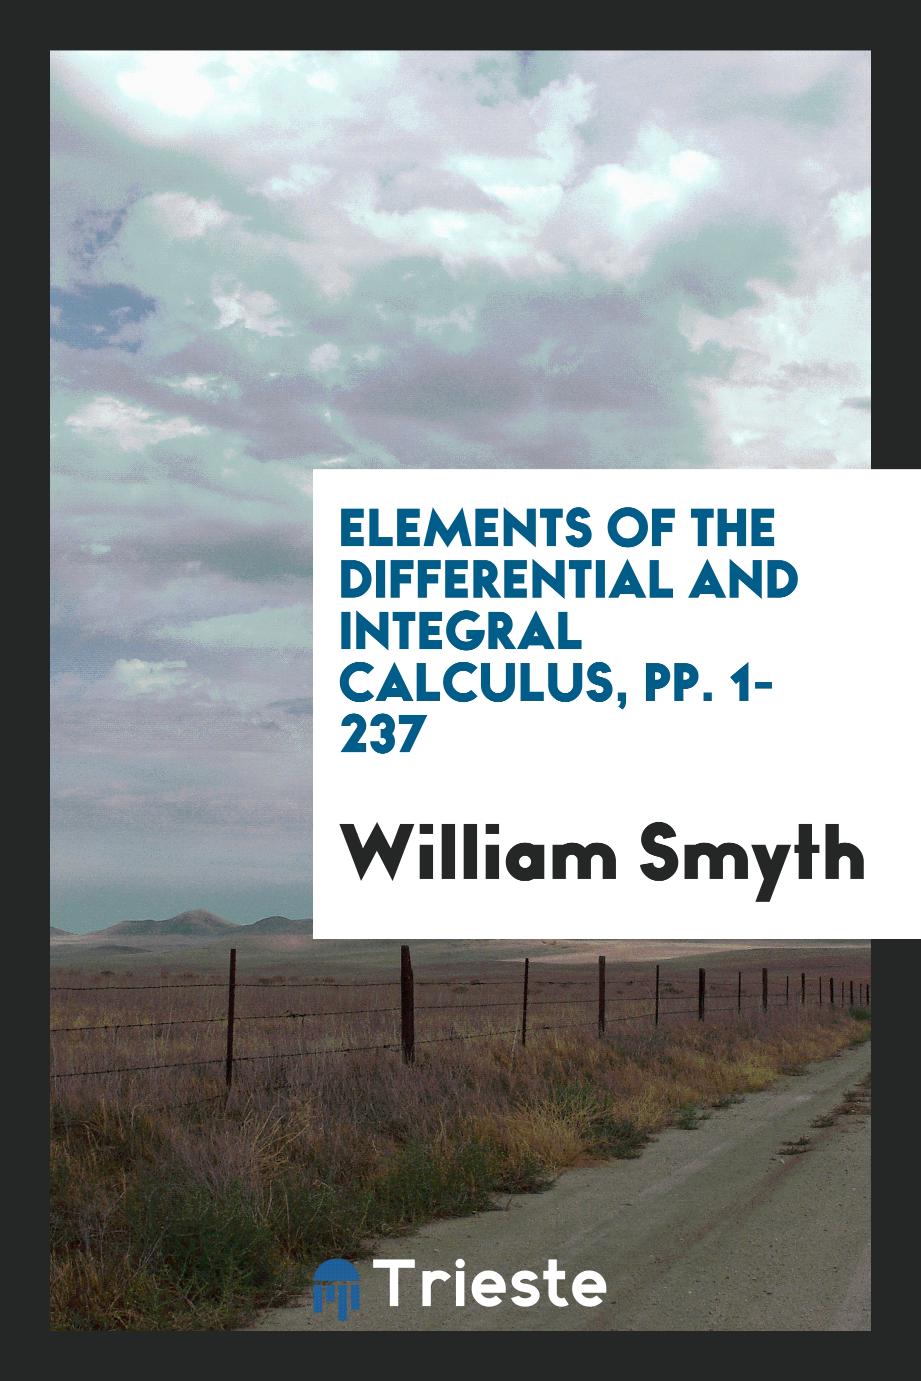 William Smyth - Elements of the Differential and Integral Calculus, pp. 1-237